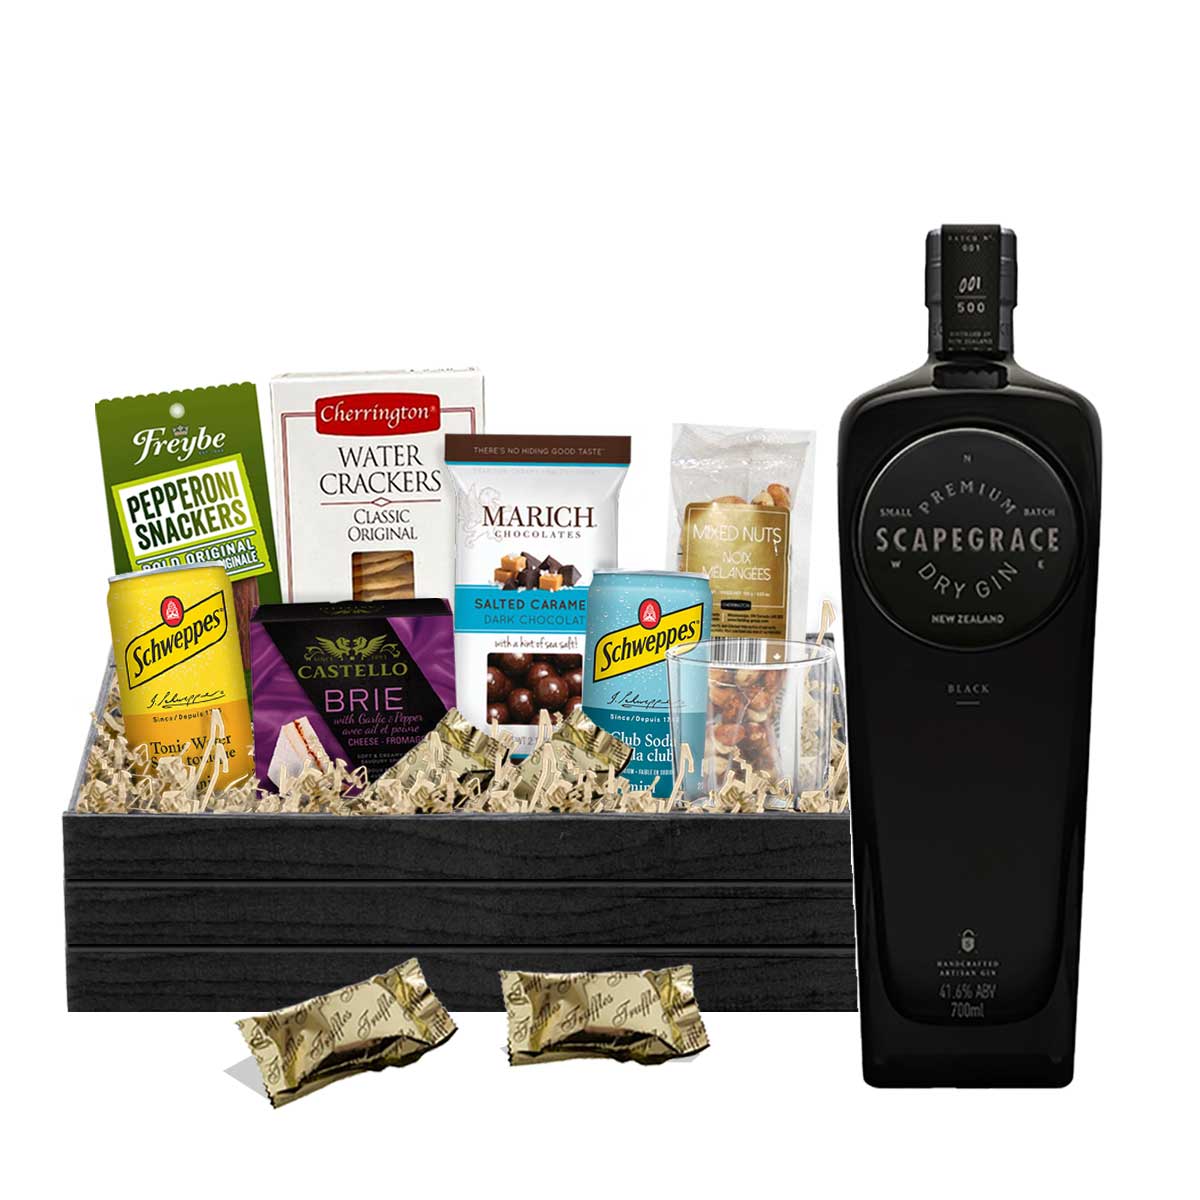 TAG Liquor Stores BC - Scapegrace Black Gin 750ml Gift Basket